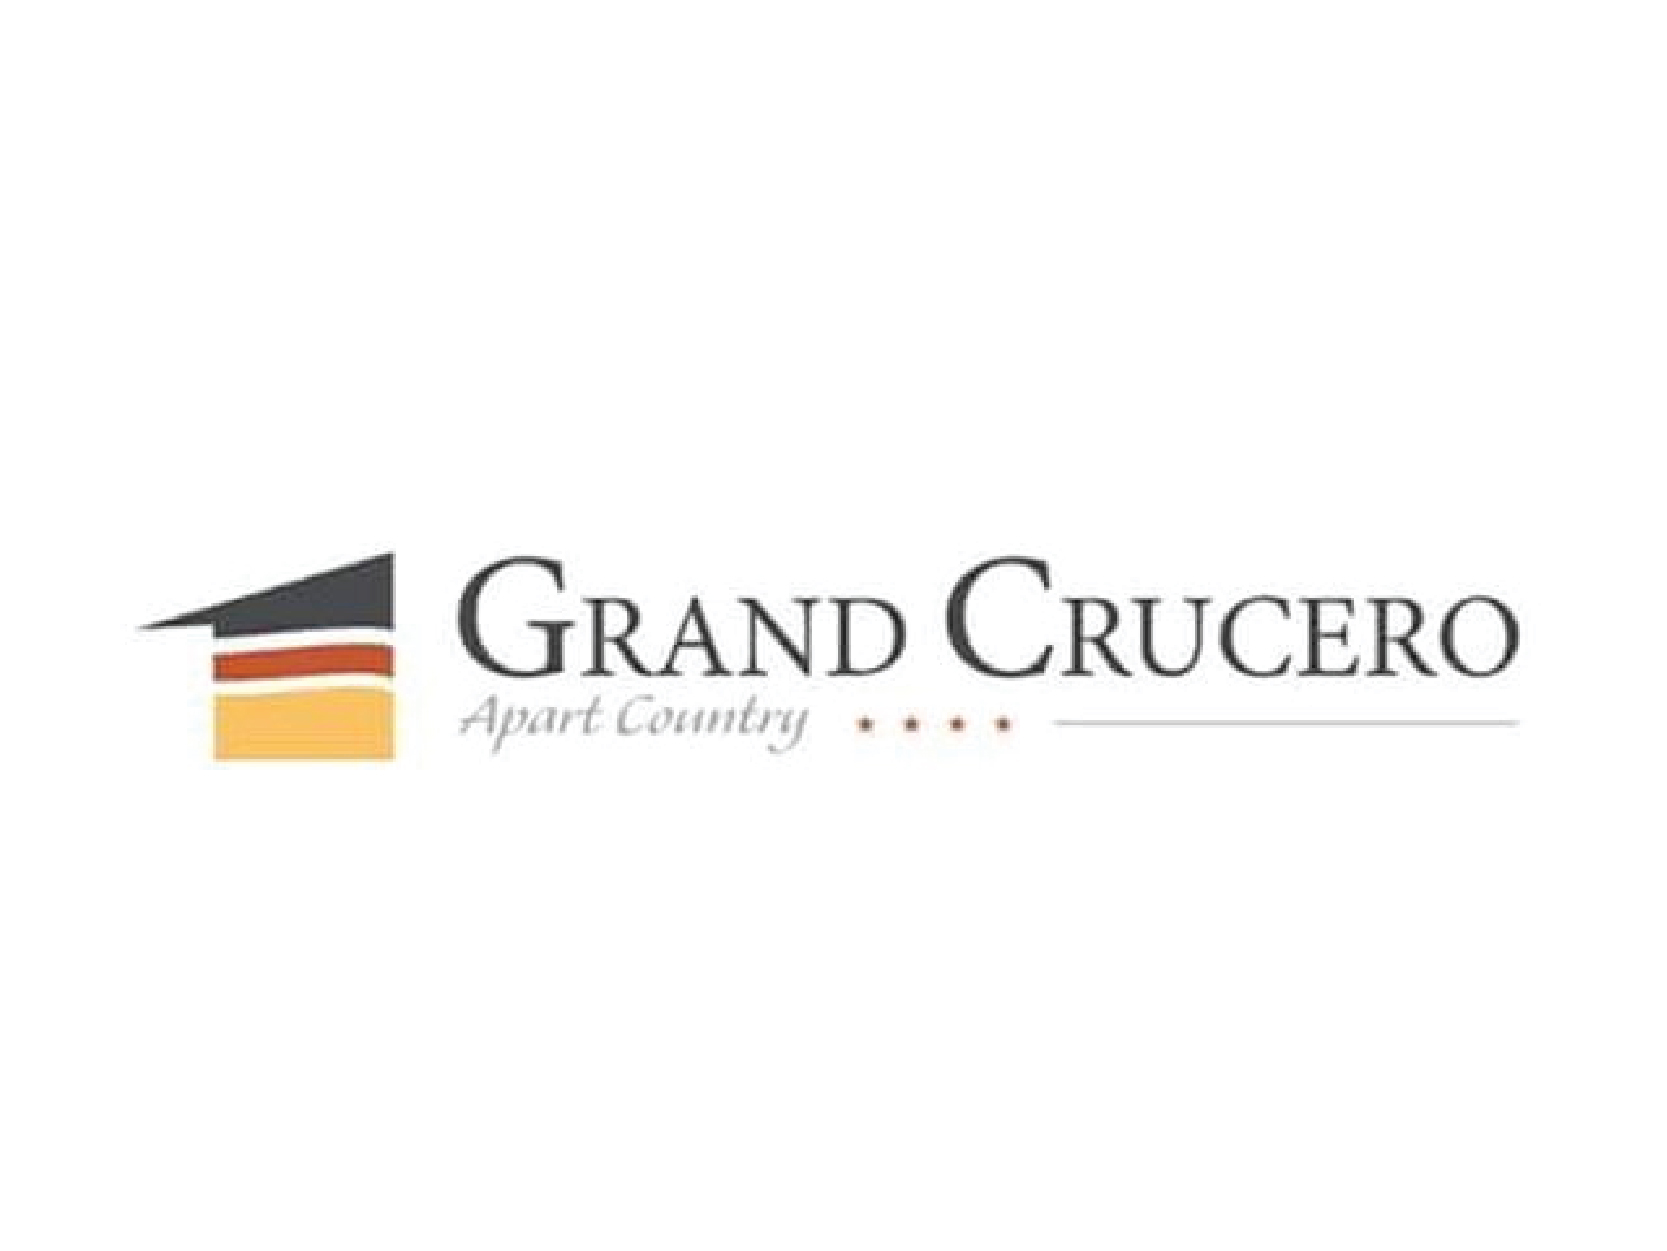 GRAND CRUCERO APART COUNTRY